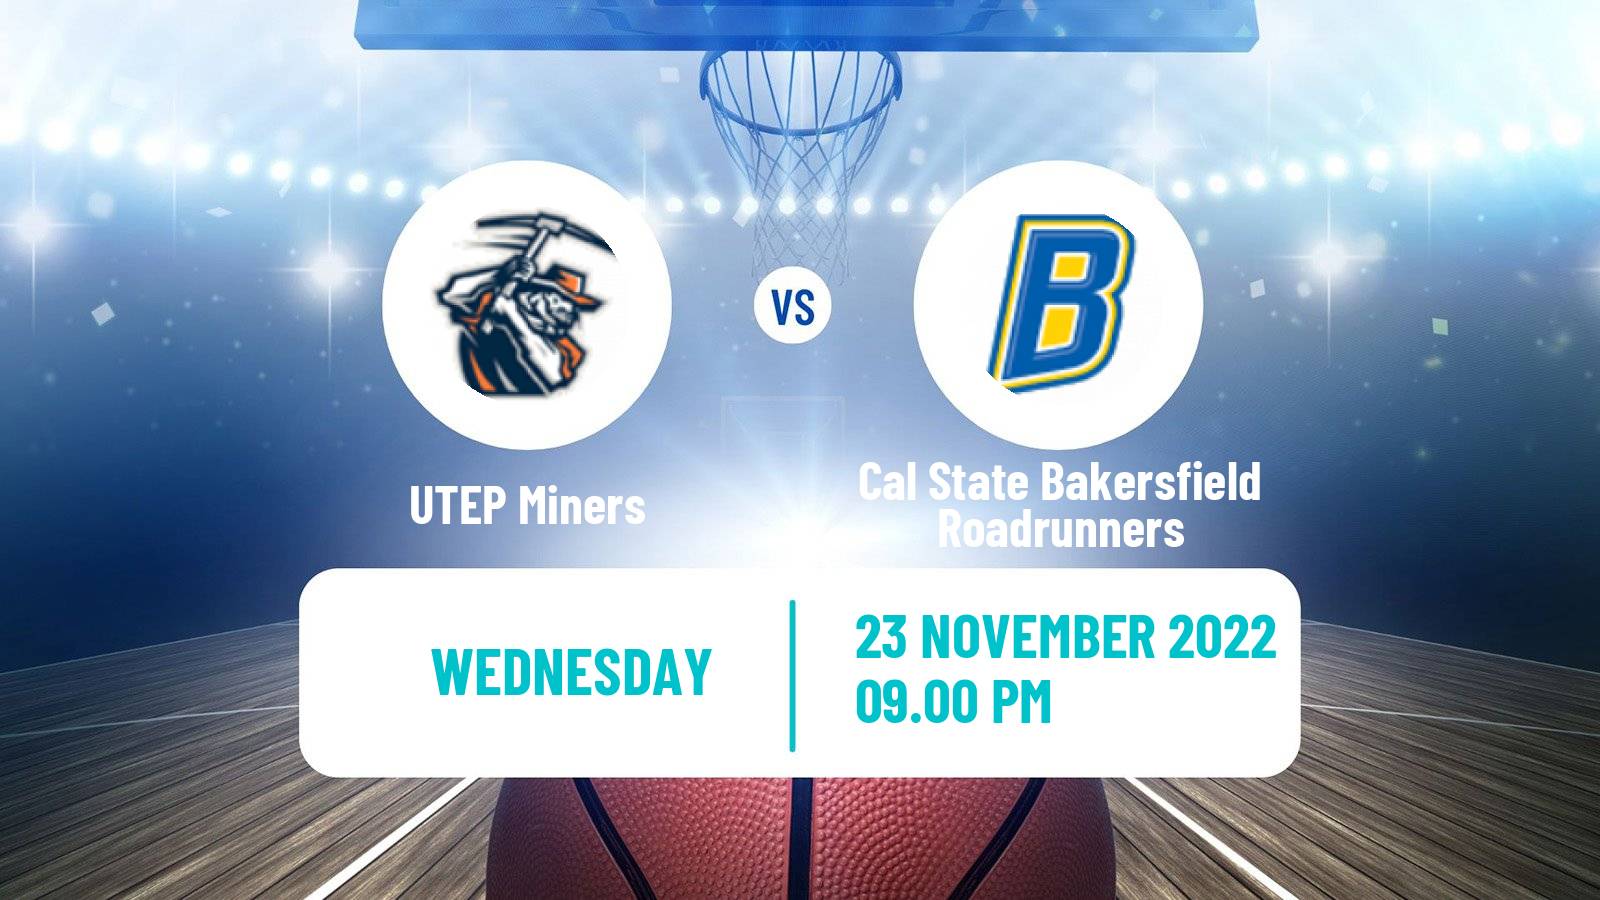 Basketball NCAA College Basketball UTEP Miners - Cal State Bakersfield Roadrunners